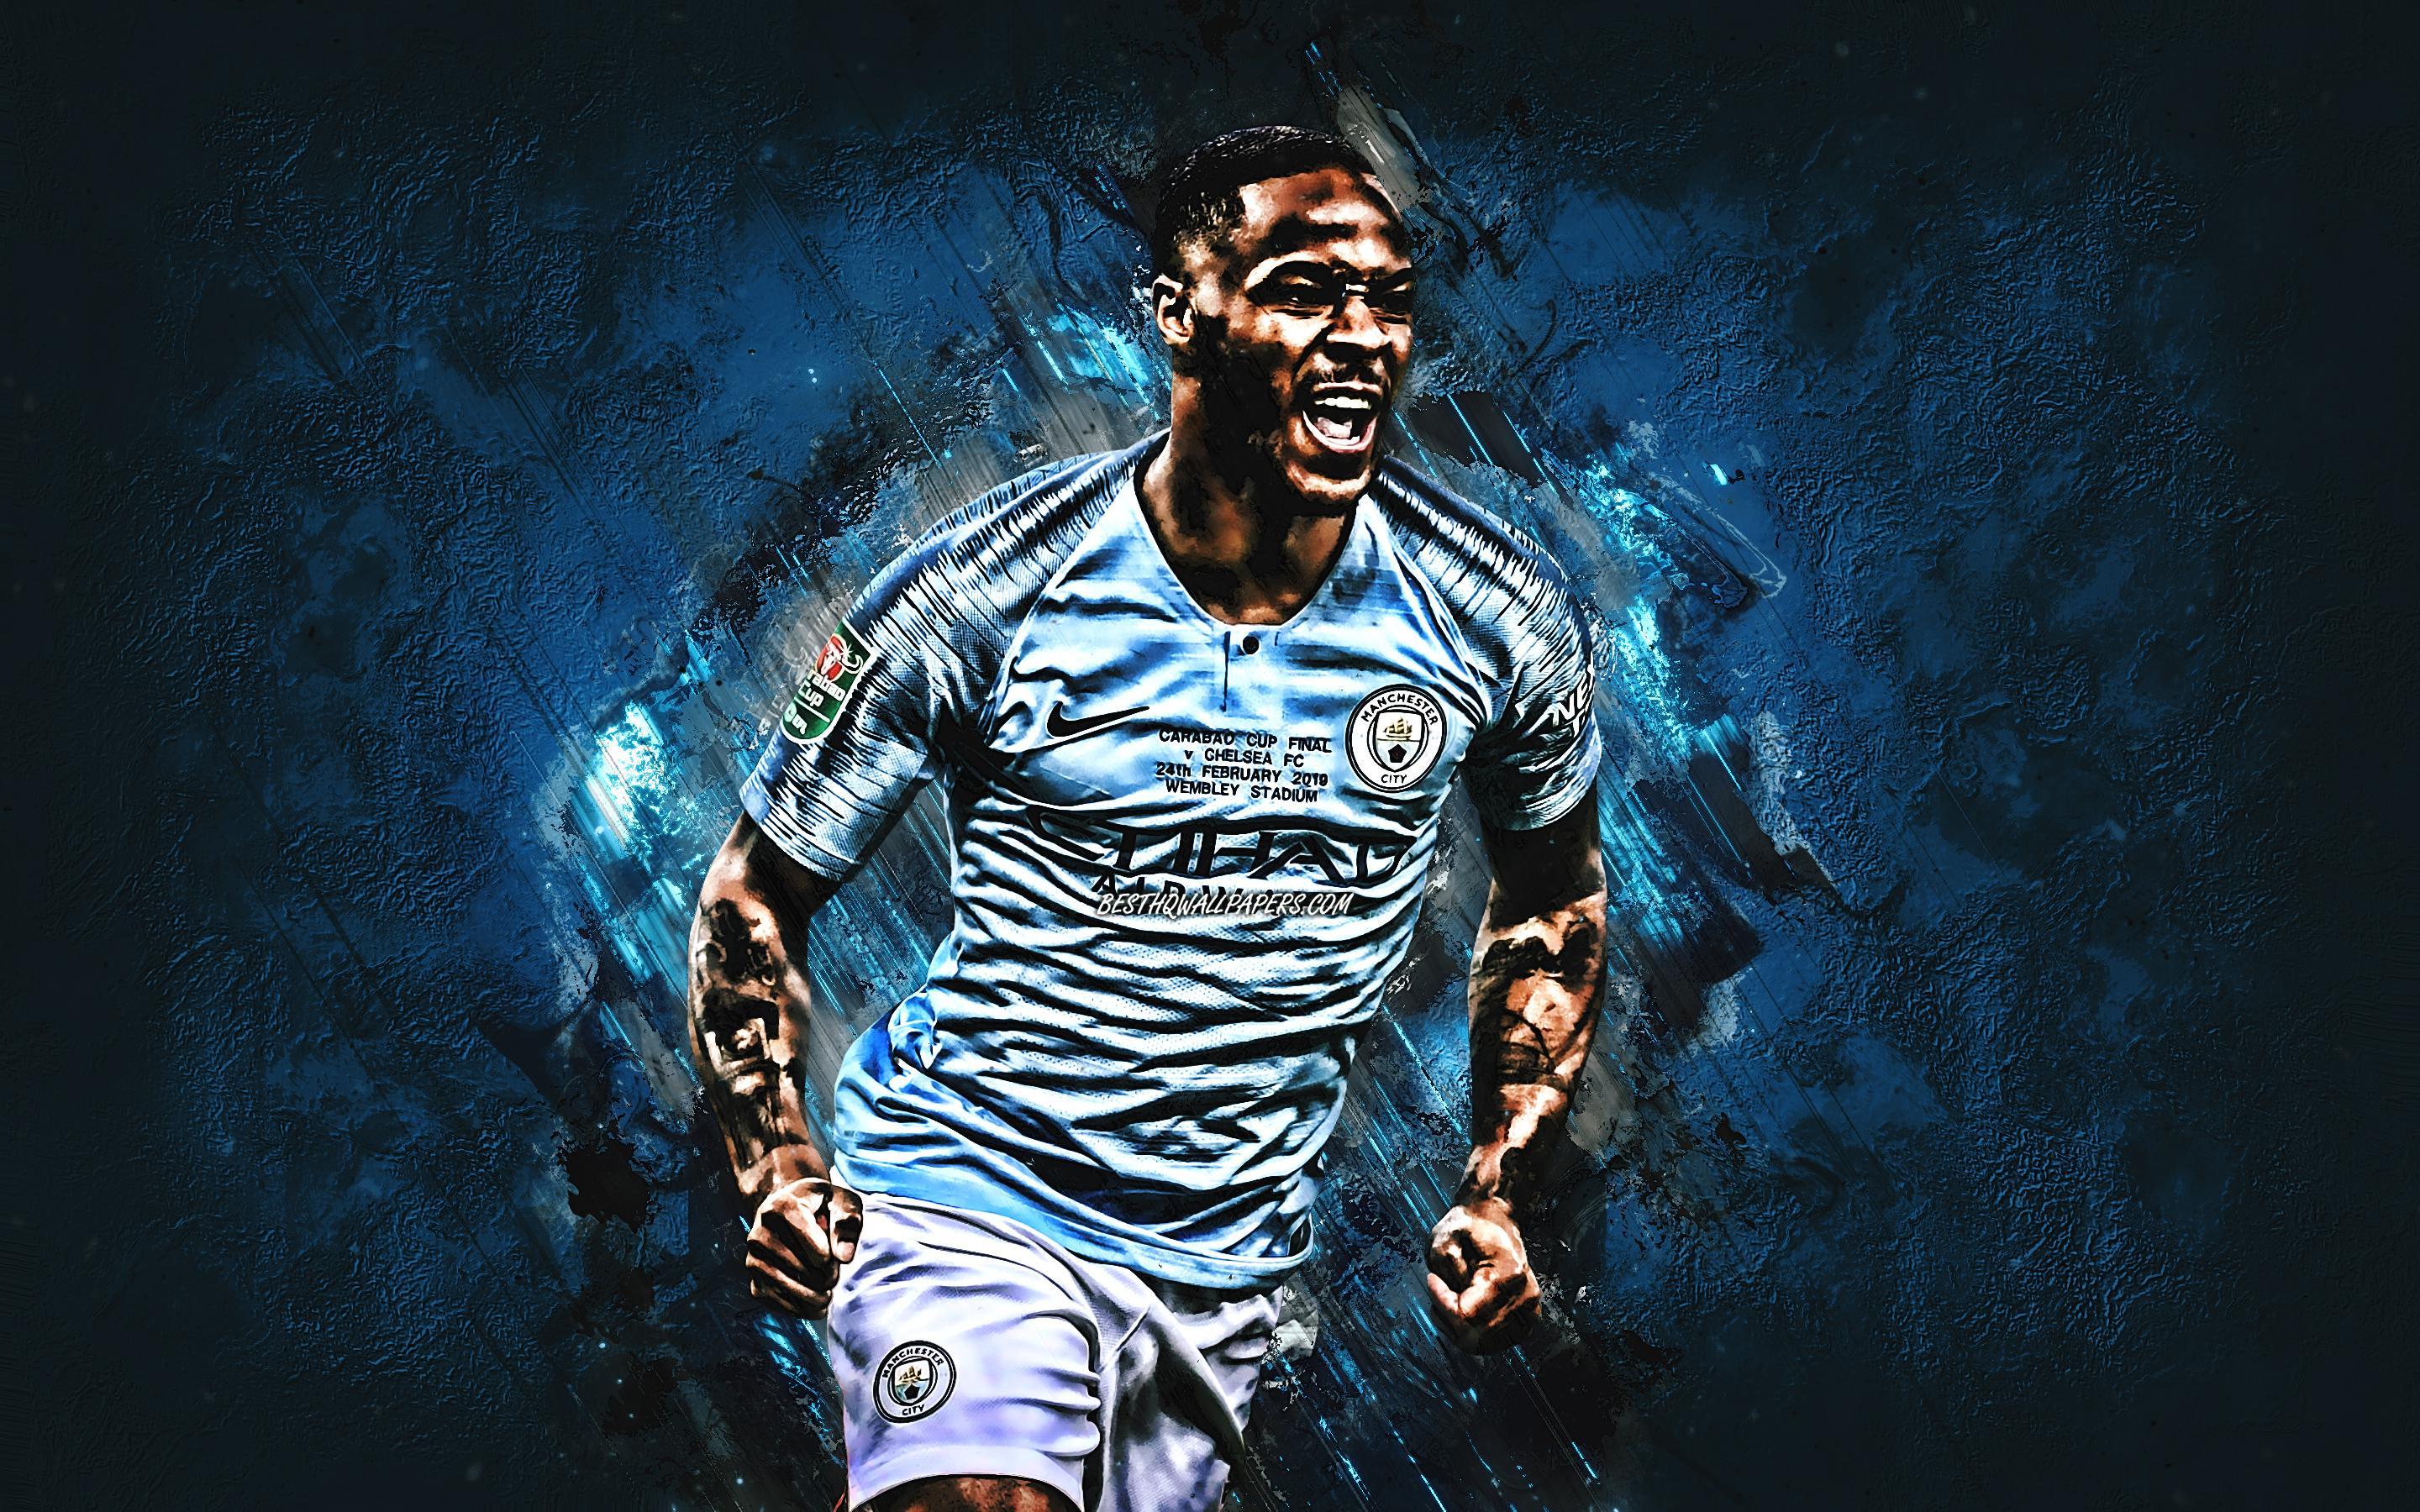 Download wallpaper Raheem Sterling, grunge, Manchester City FC, England, soccer, Raheem Shaquille Sterling, english footballers, blue stone, Premier League, Man City, football for desktop with resolution 2880x1800. High Quality HD picture